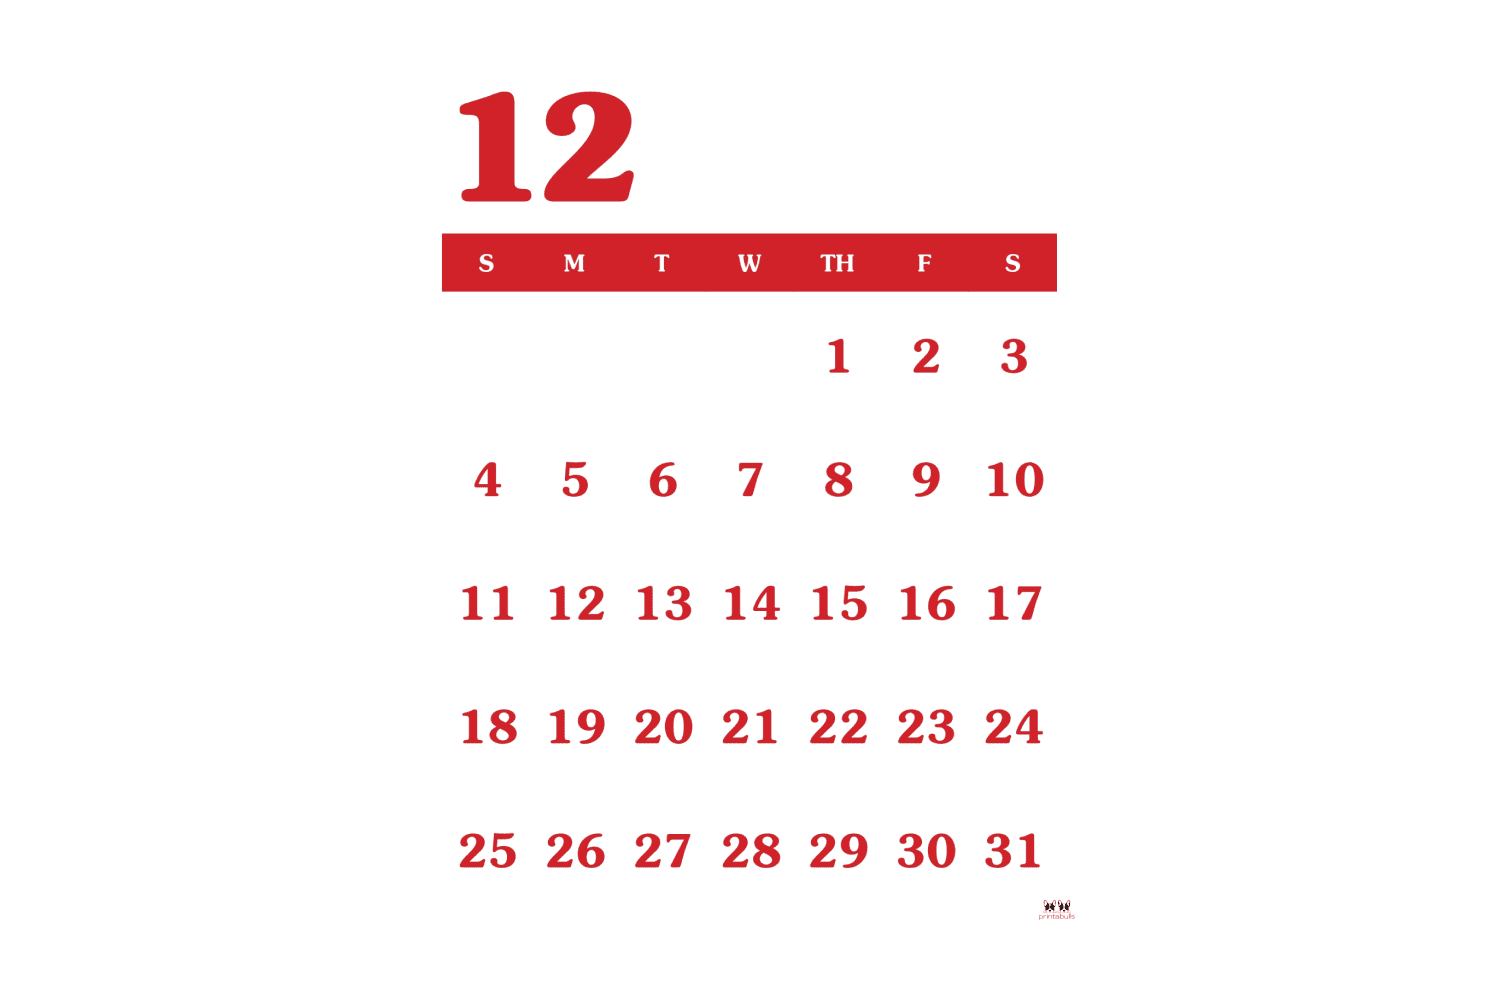 December calendar with red dates.